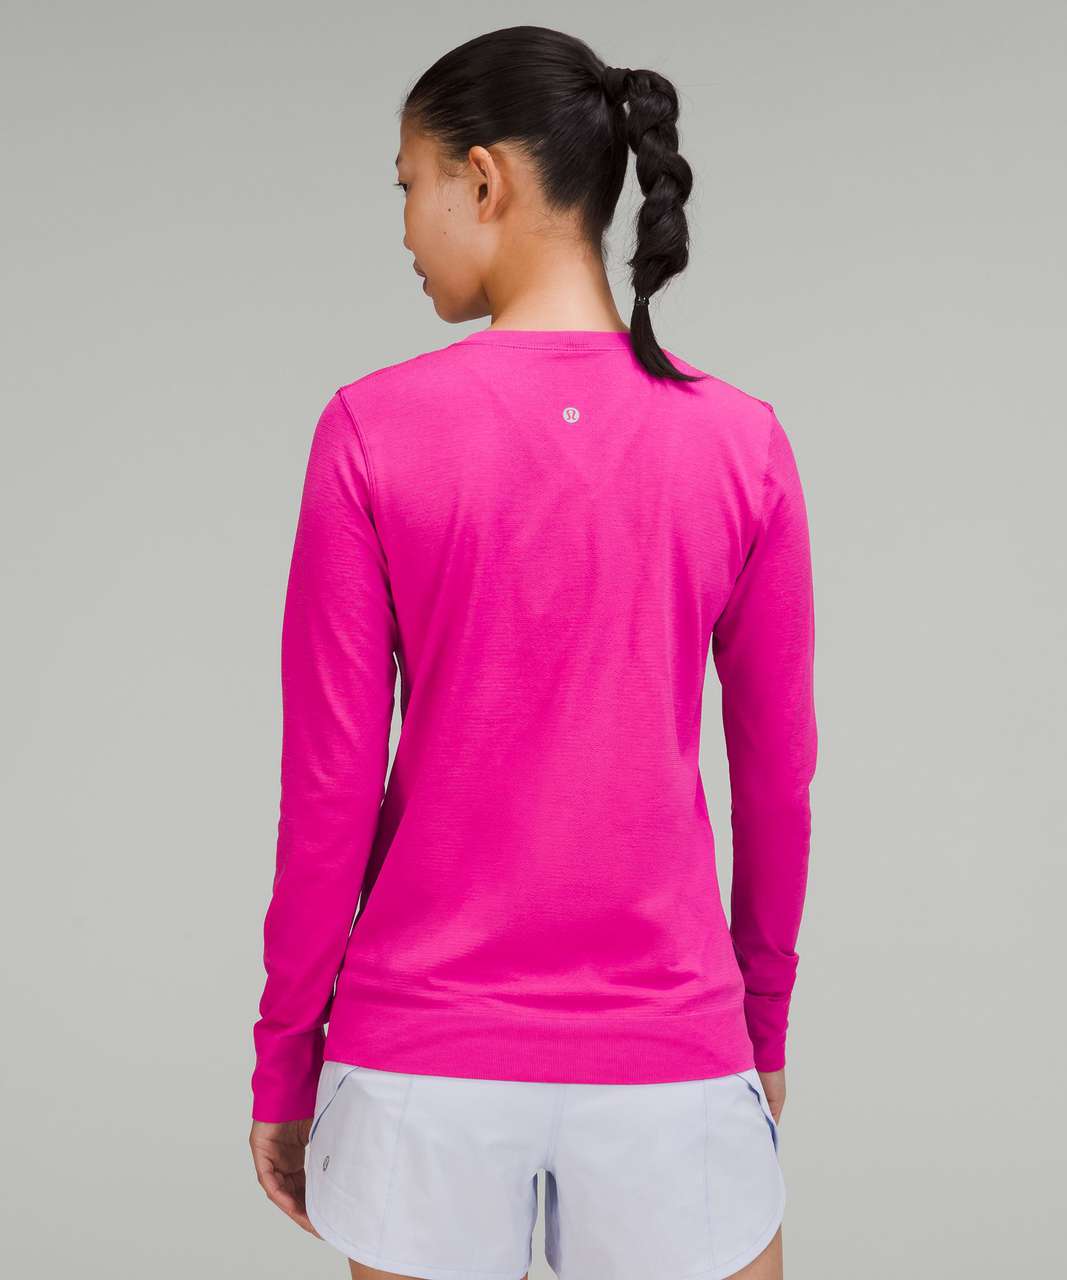 Lululemon Swiftly Relaxed-Fit Long Sleeve Shirt - Sonic Pink / Sonic Pink